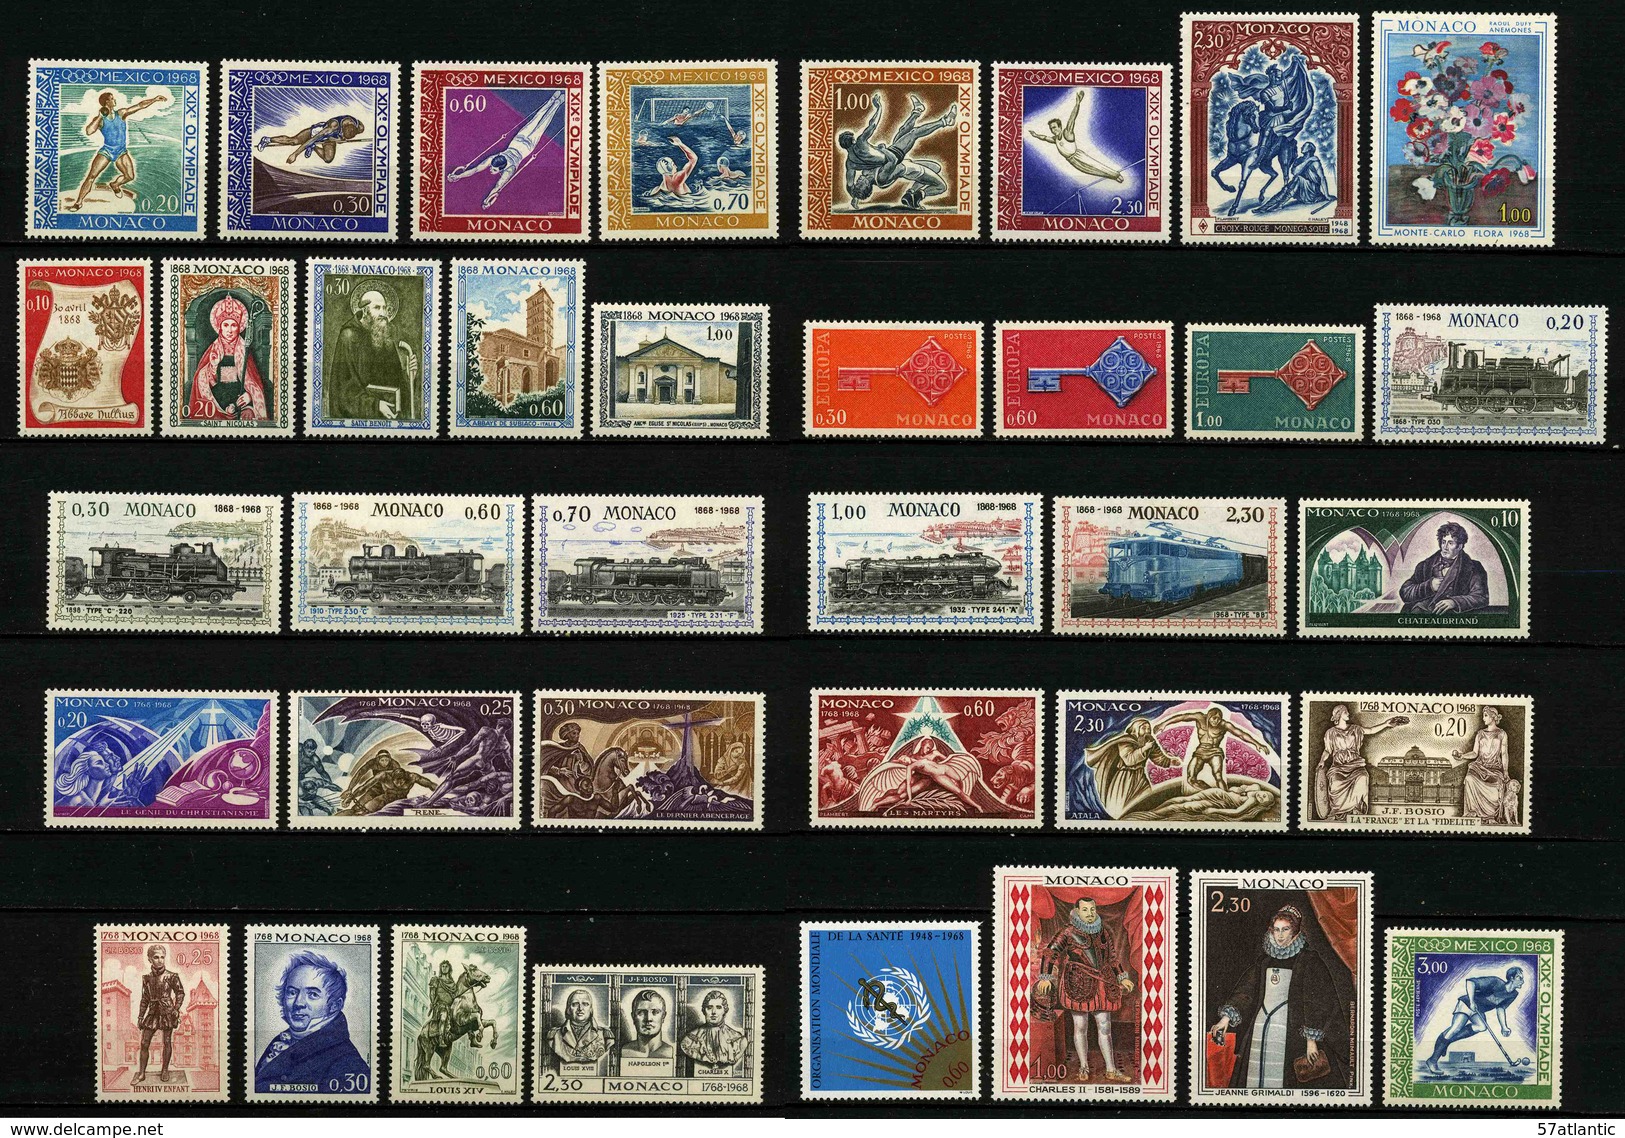 MONACO - ANNEE COMPLETE 1968 - YT 736 à 771 ** + PA 92 ** -  37 TIMBRES NEUFS ** - Full Years